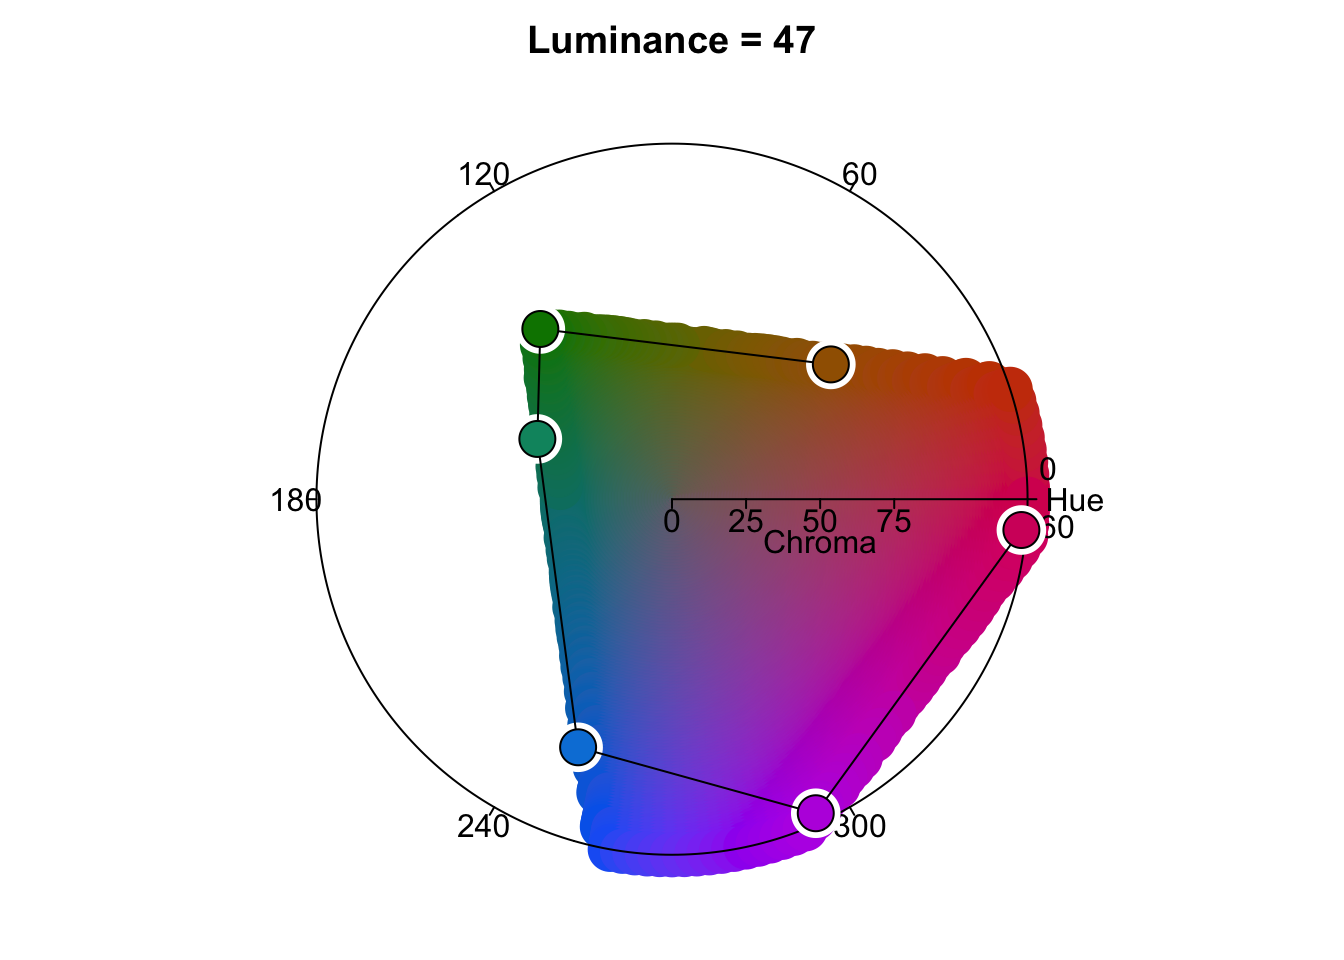 A partially filled colour wheel for a luminance of 47 in HCL space, showing hues of orange, red and purple with high chroma, but with no greens or yellows of high chroma.